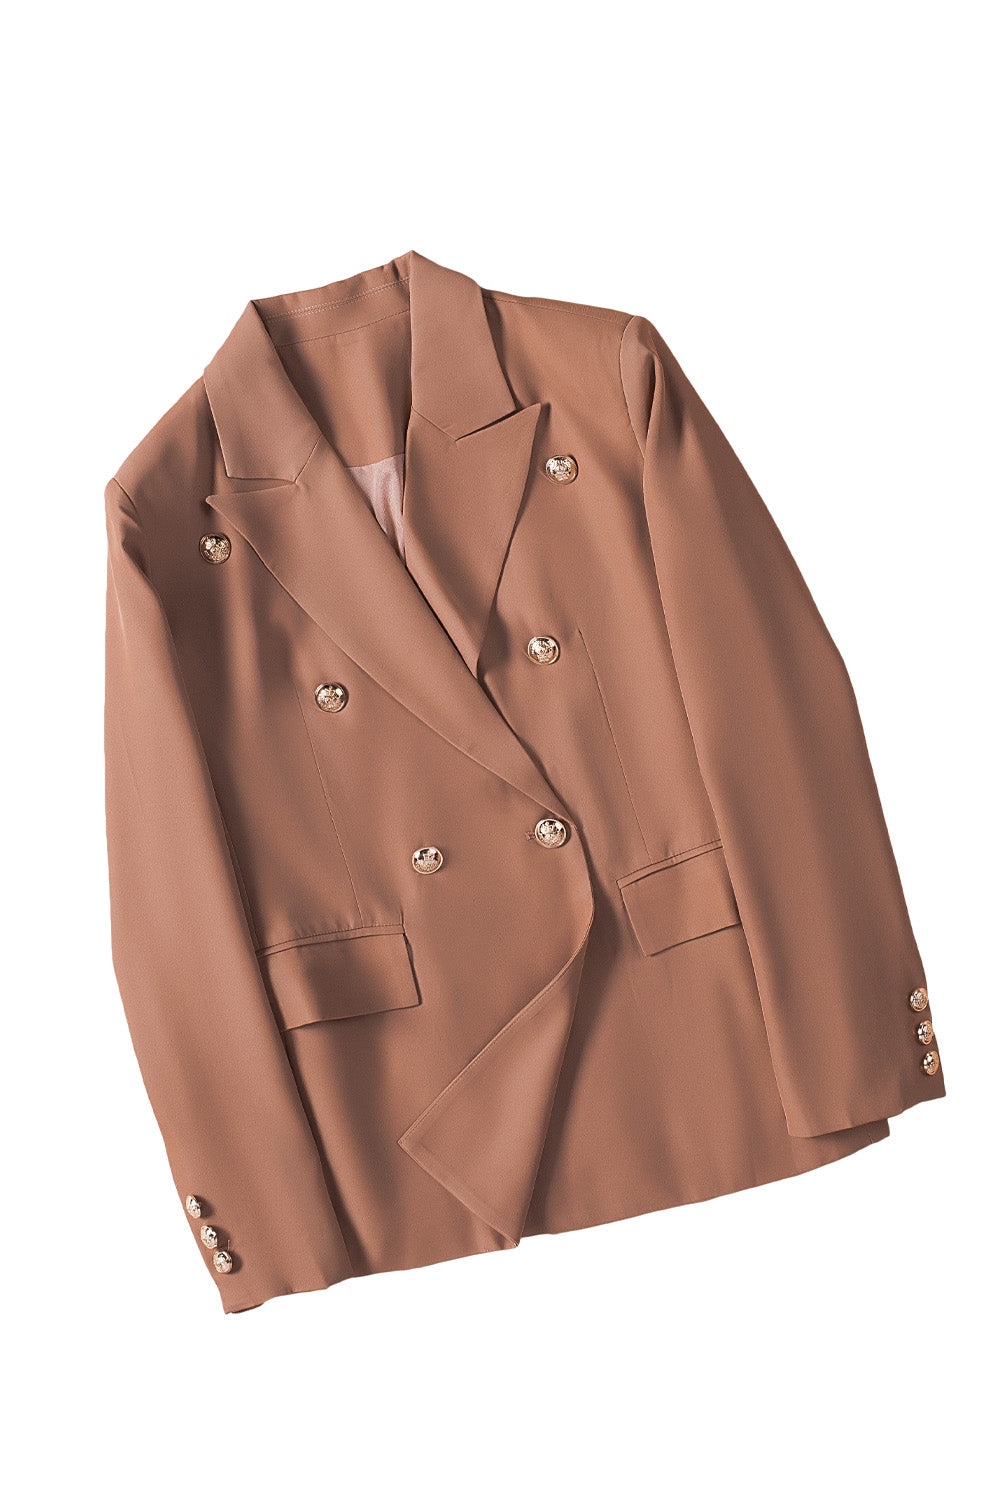 Double Breasted Lapel Neck Flap Pocket Casual Brown Blazer for Women - Bellisima Clothing Collective